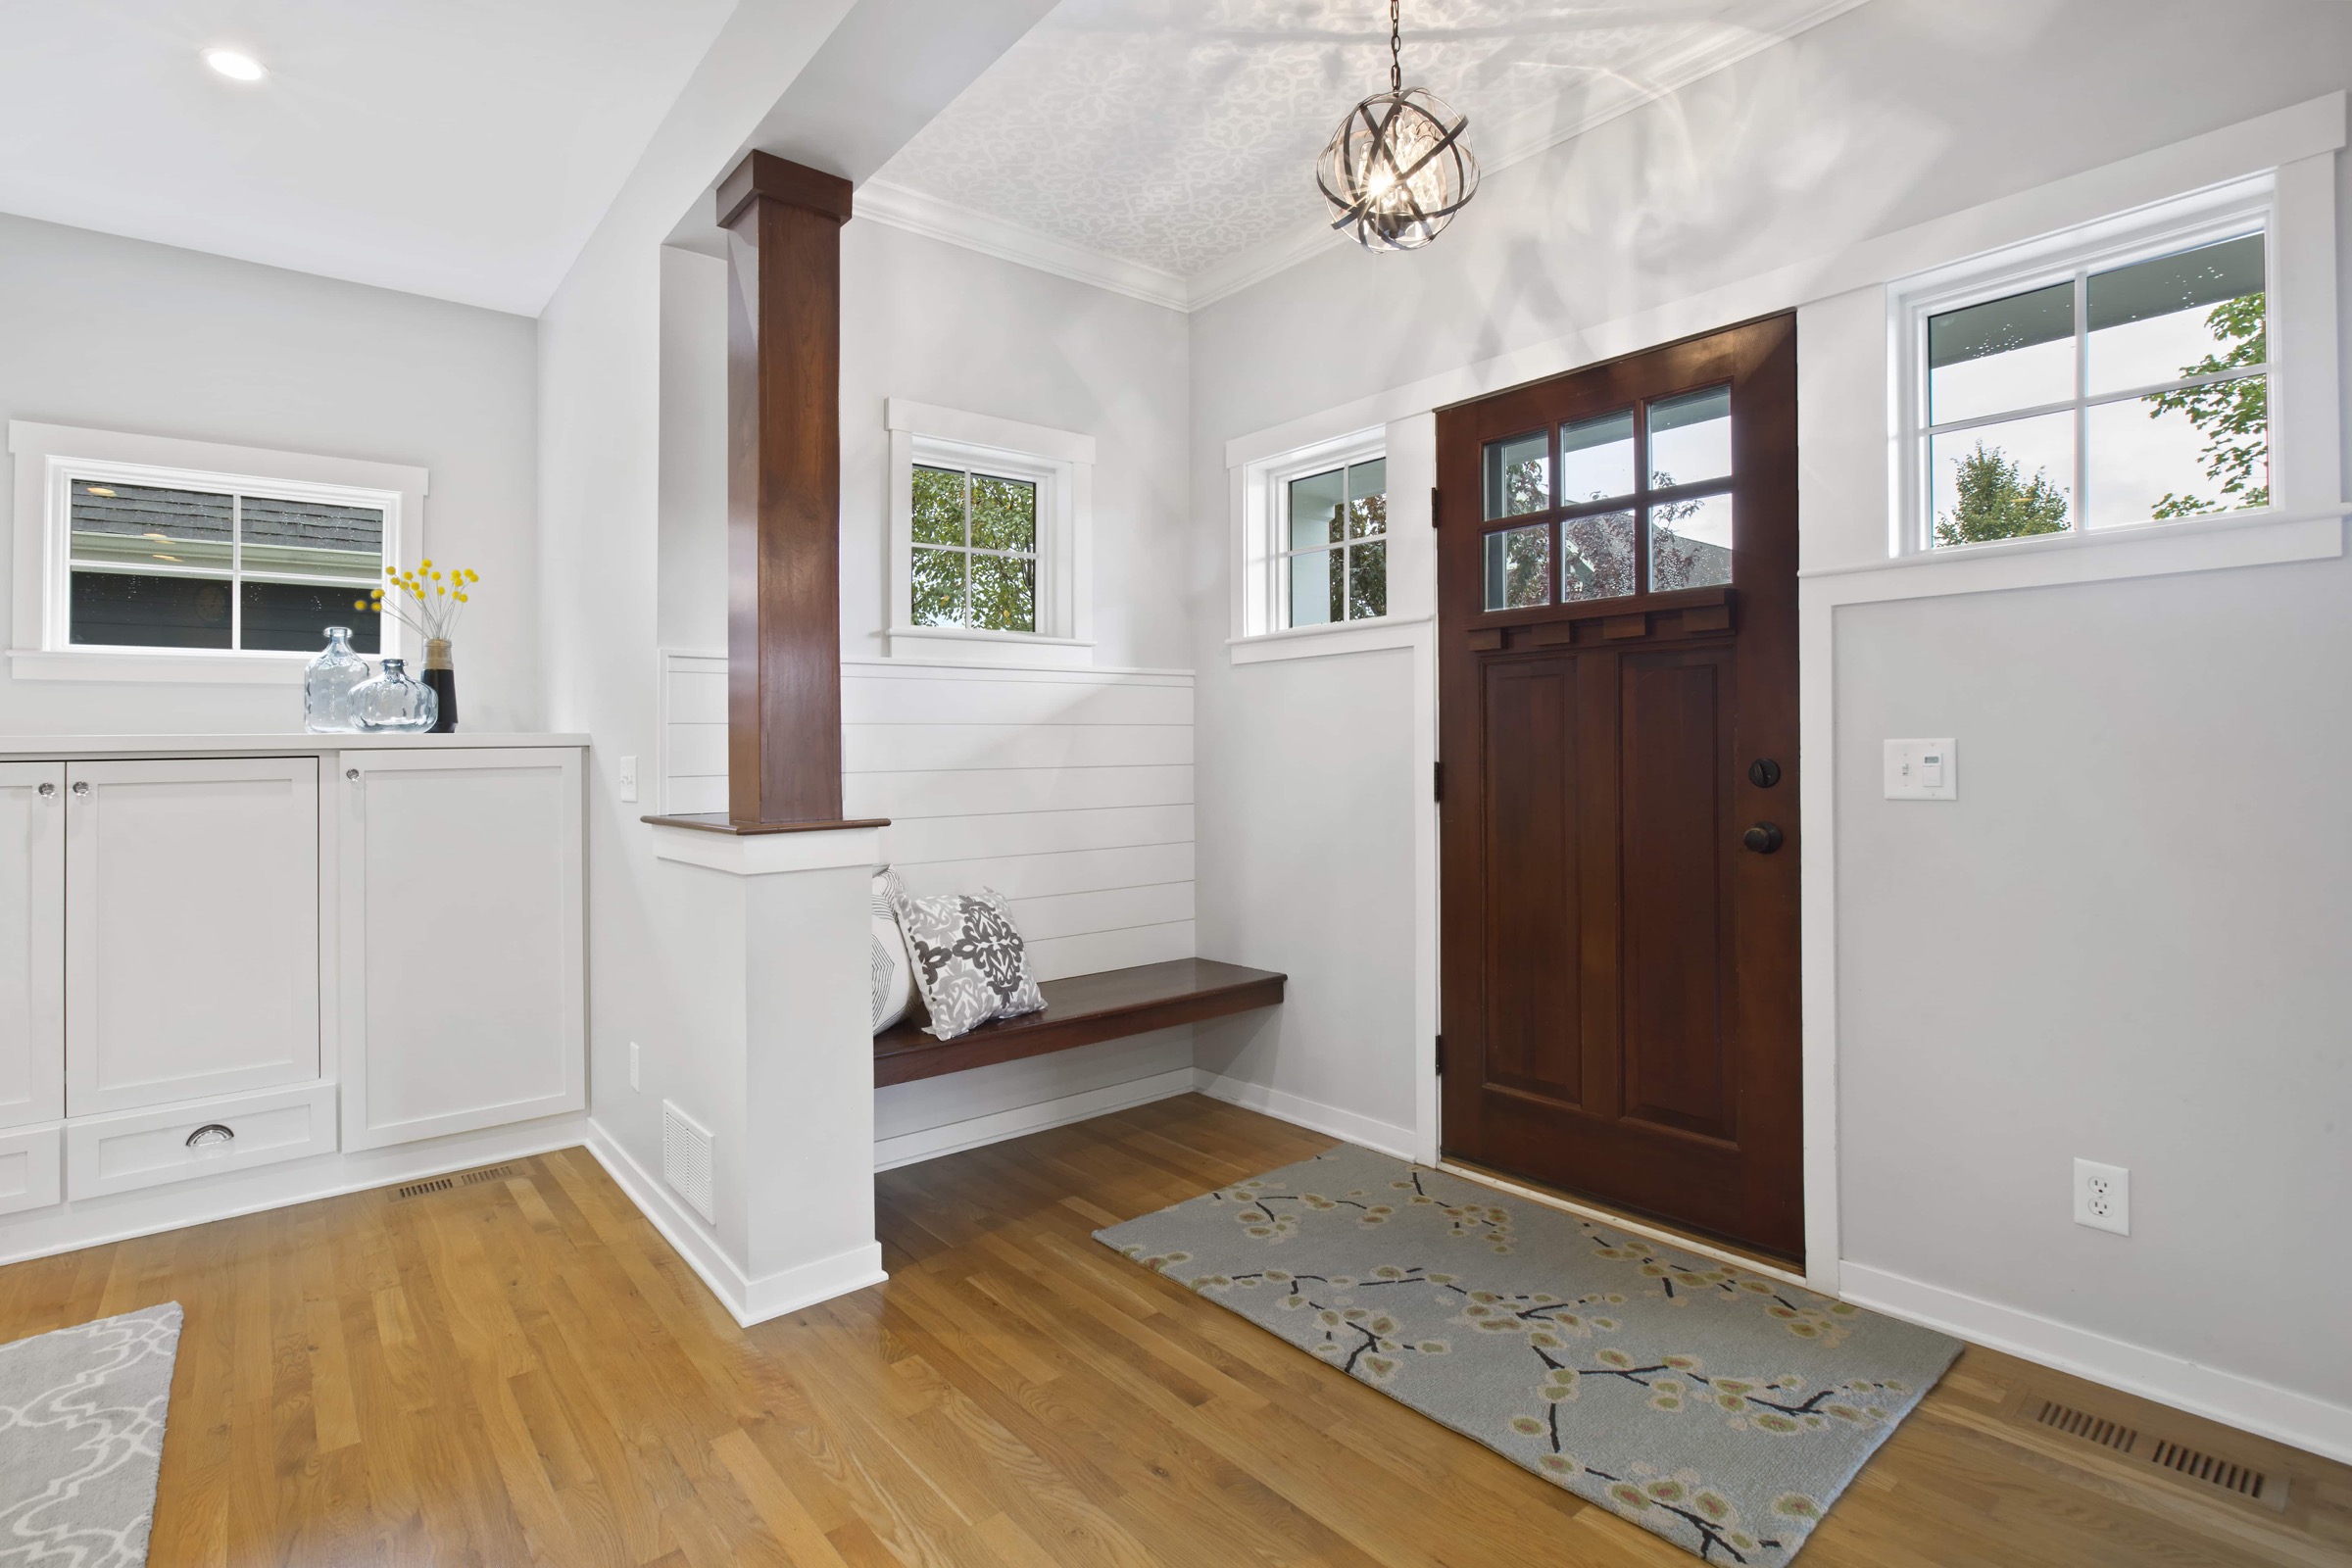 Interior entryway with modern baseboards.